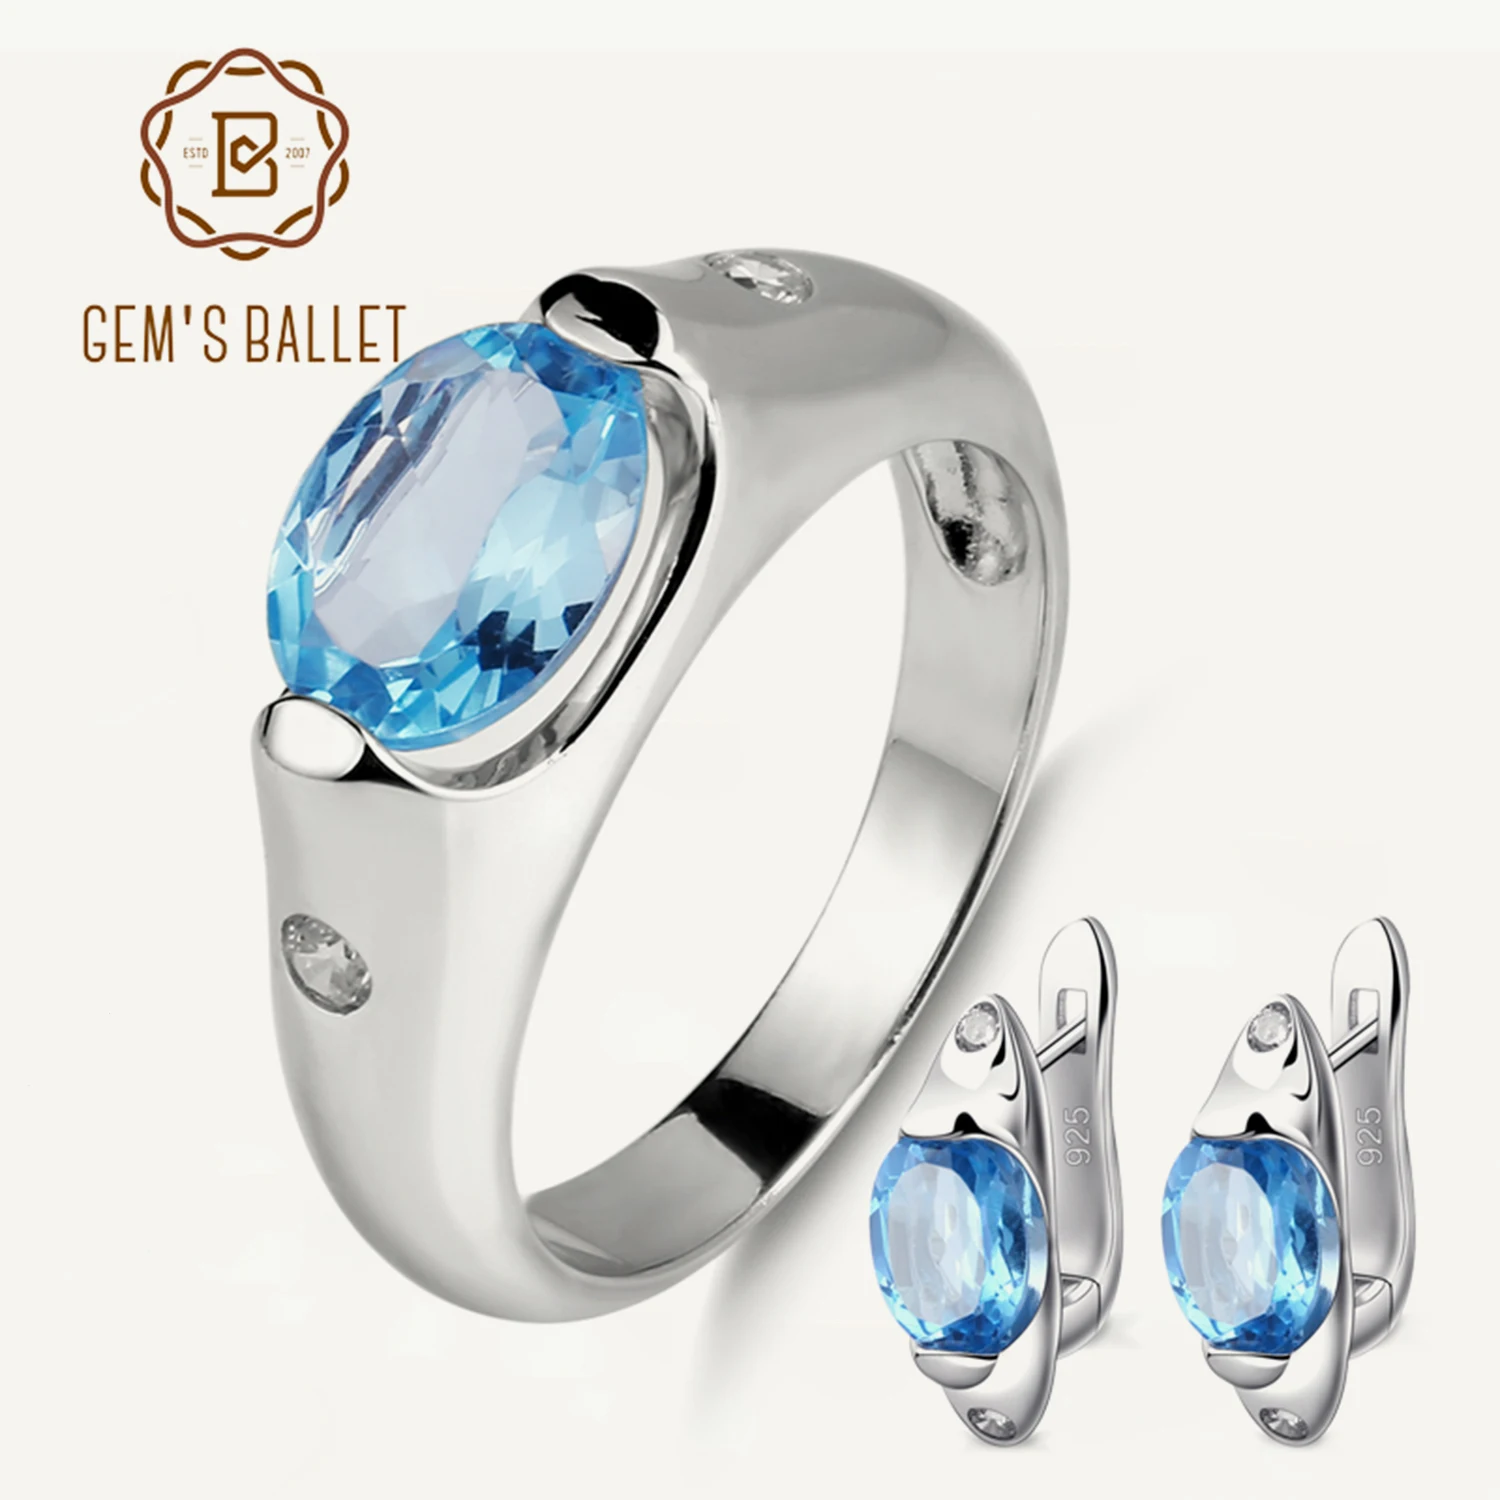 5.52ct Casual Oval Natural Blue Topaz Gemstone Jewelry Set 925 Sterling ... - $113.02